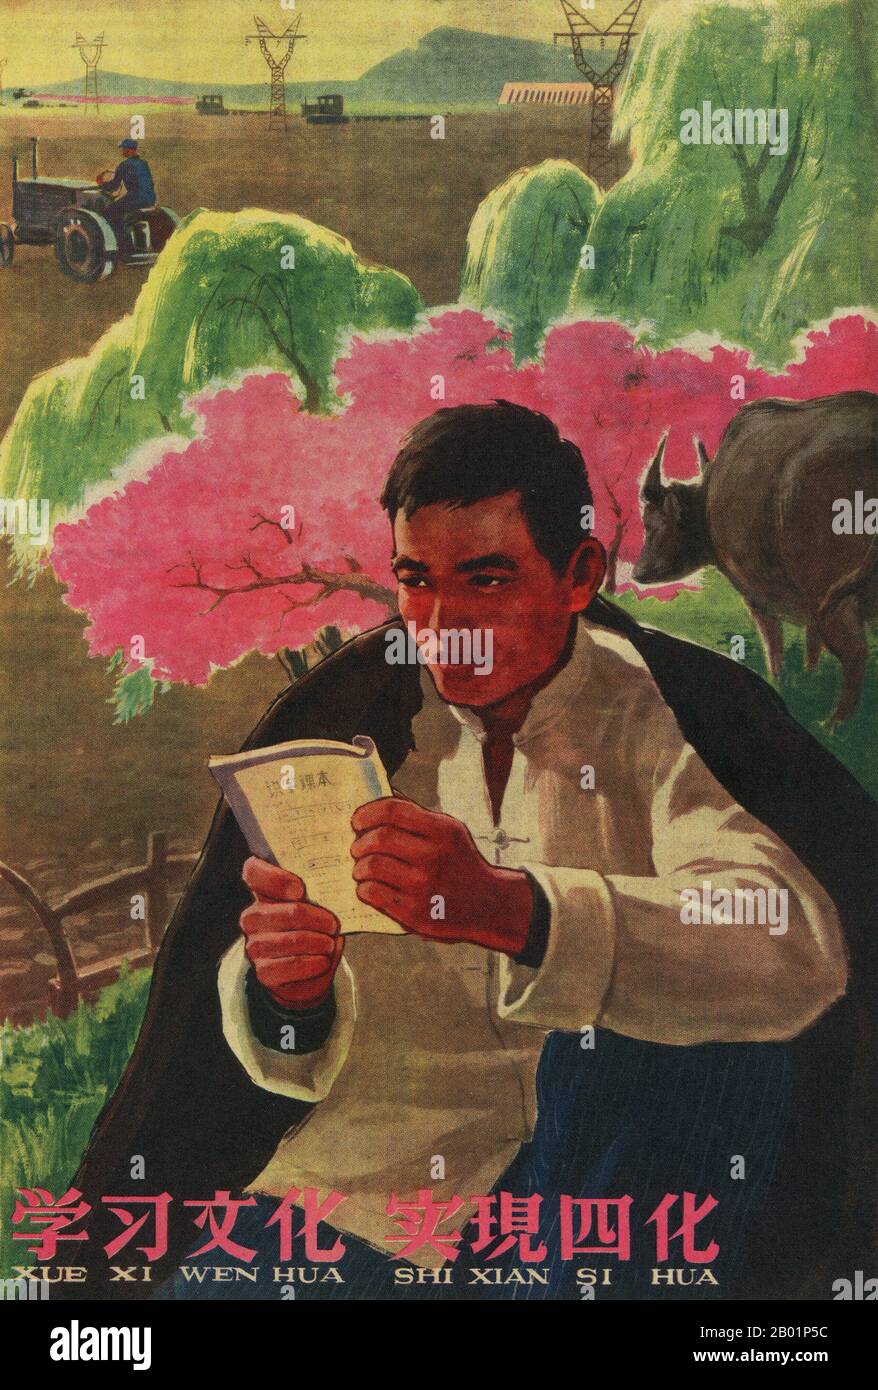 China: 'Study Culture to Realise the Four Modernisations!' Propaganda poster from the Great Leap Forward (1958-1961), c. 1963  The Great Leap Forward of the People's Republic of China (PRC) was an economic and social campaign of the Communist Party of China (CPC), reflected in planning decisions from 1958 to 1961, which aimed to use China's vast population to rapidly transform the country from an agrarian economy into a modern communist society through the process of rapid industrialisation, and collectivisation. Mao Zedong led the campaign based on the Theory of Productive Forces. Stock Photo